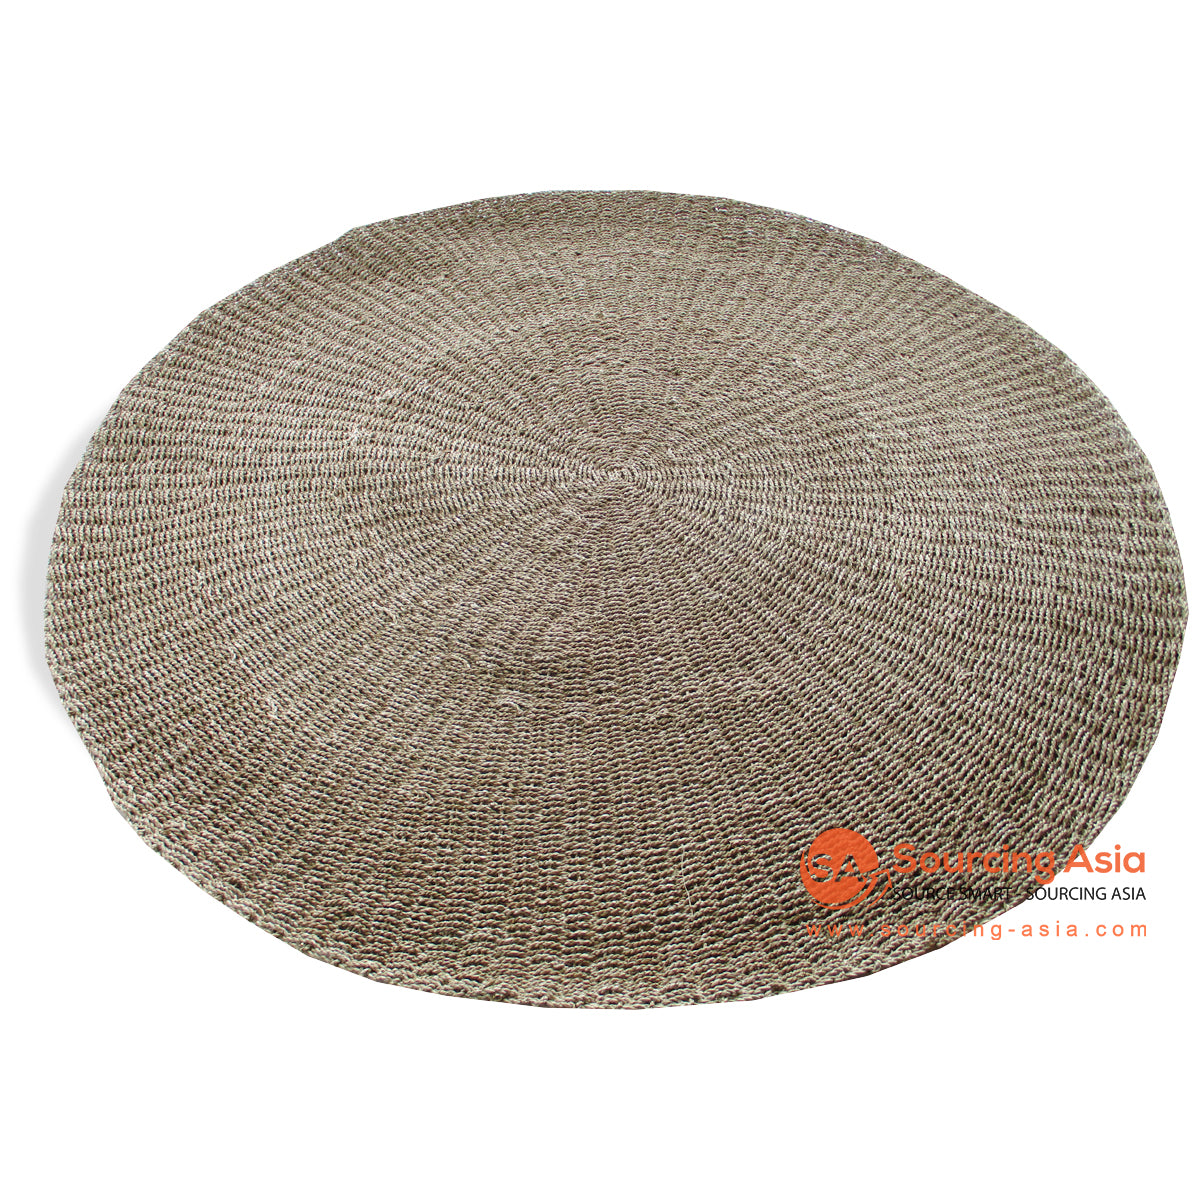 JMH051-1 NATURAL WOVEN SEAGRASS ROUND RUG